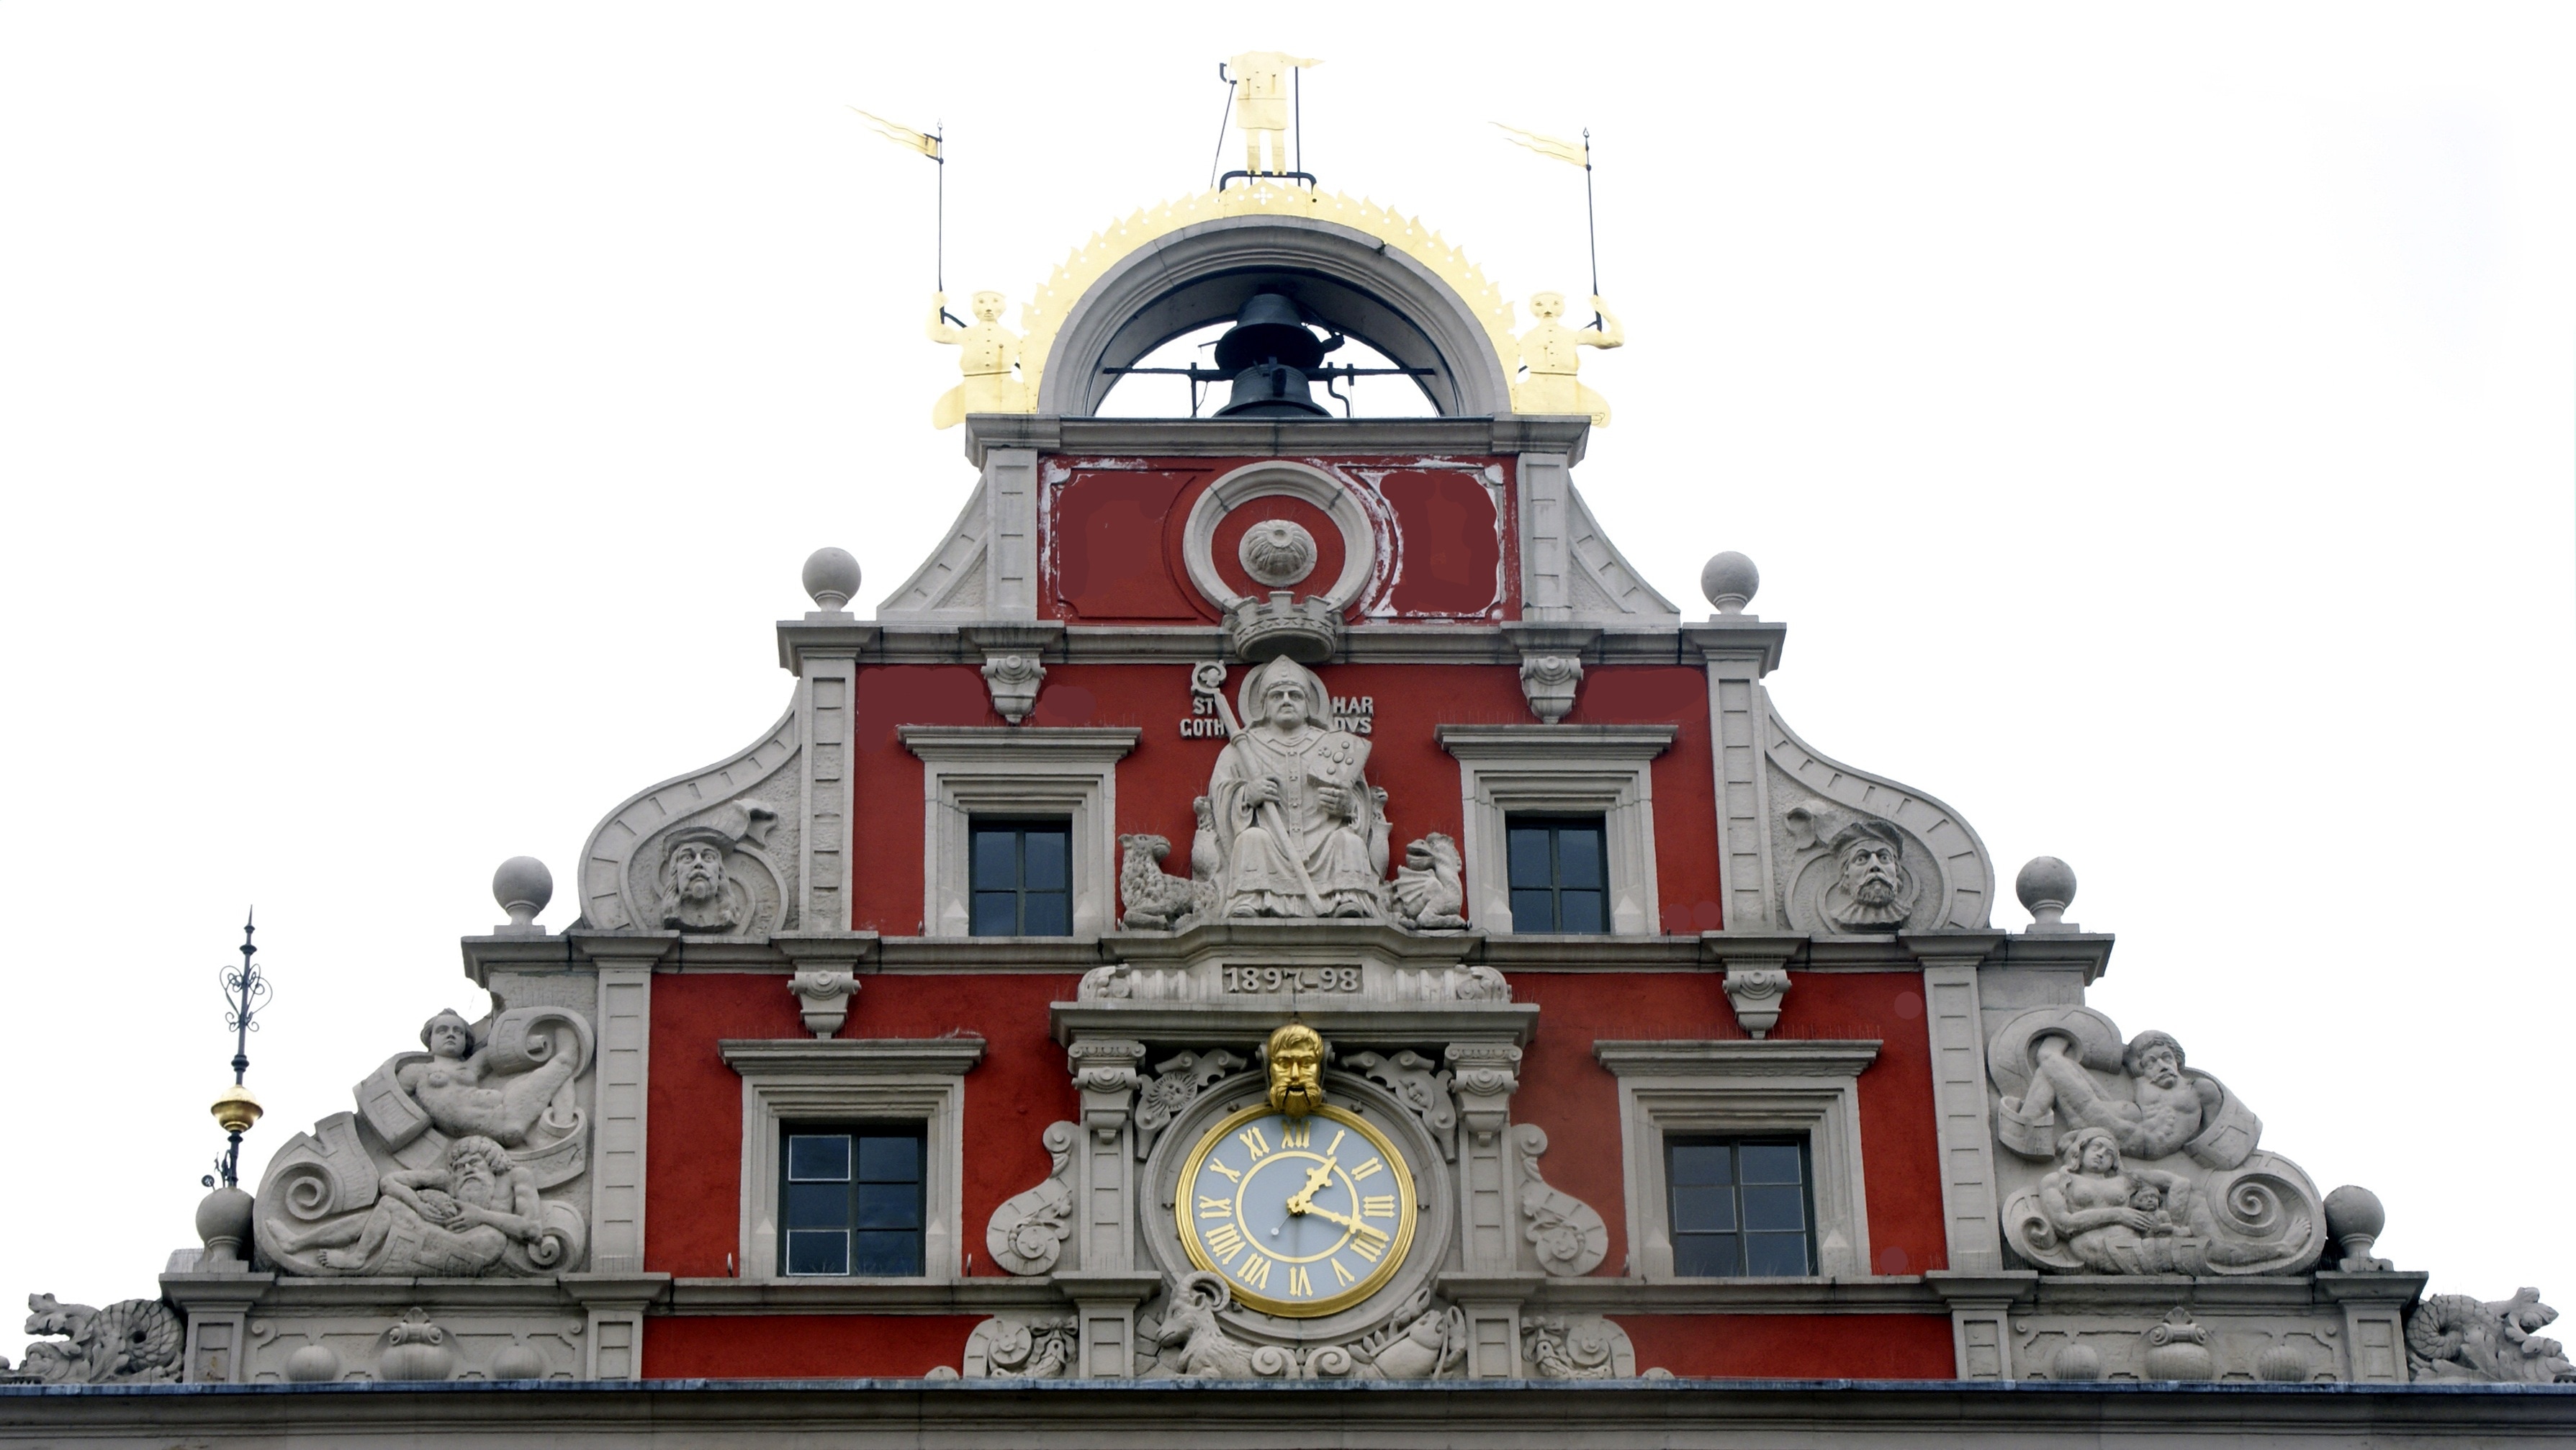 gray and red concrete building with clock